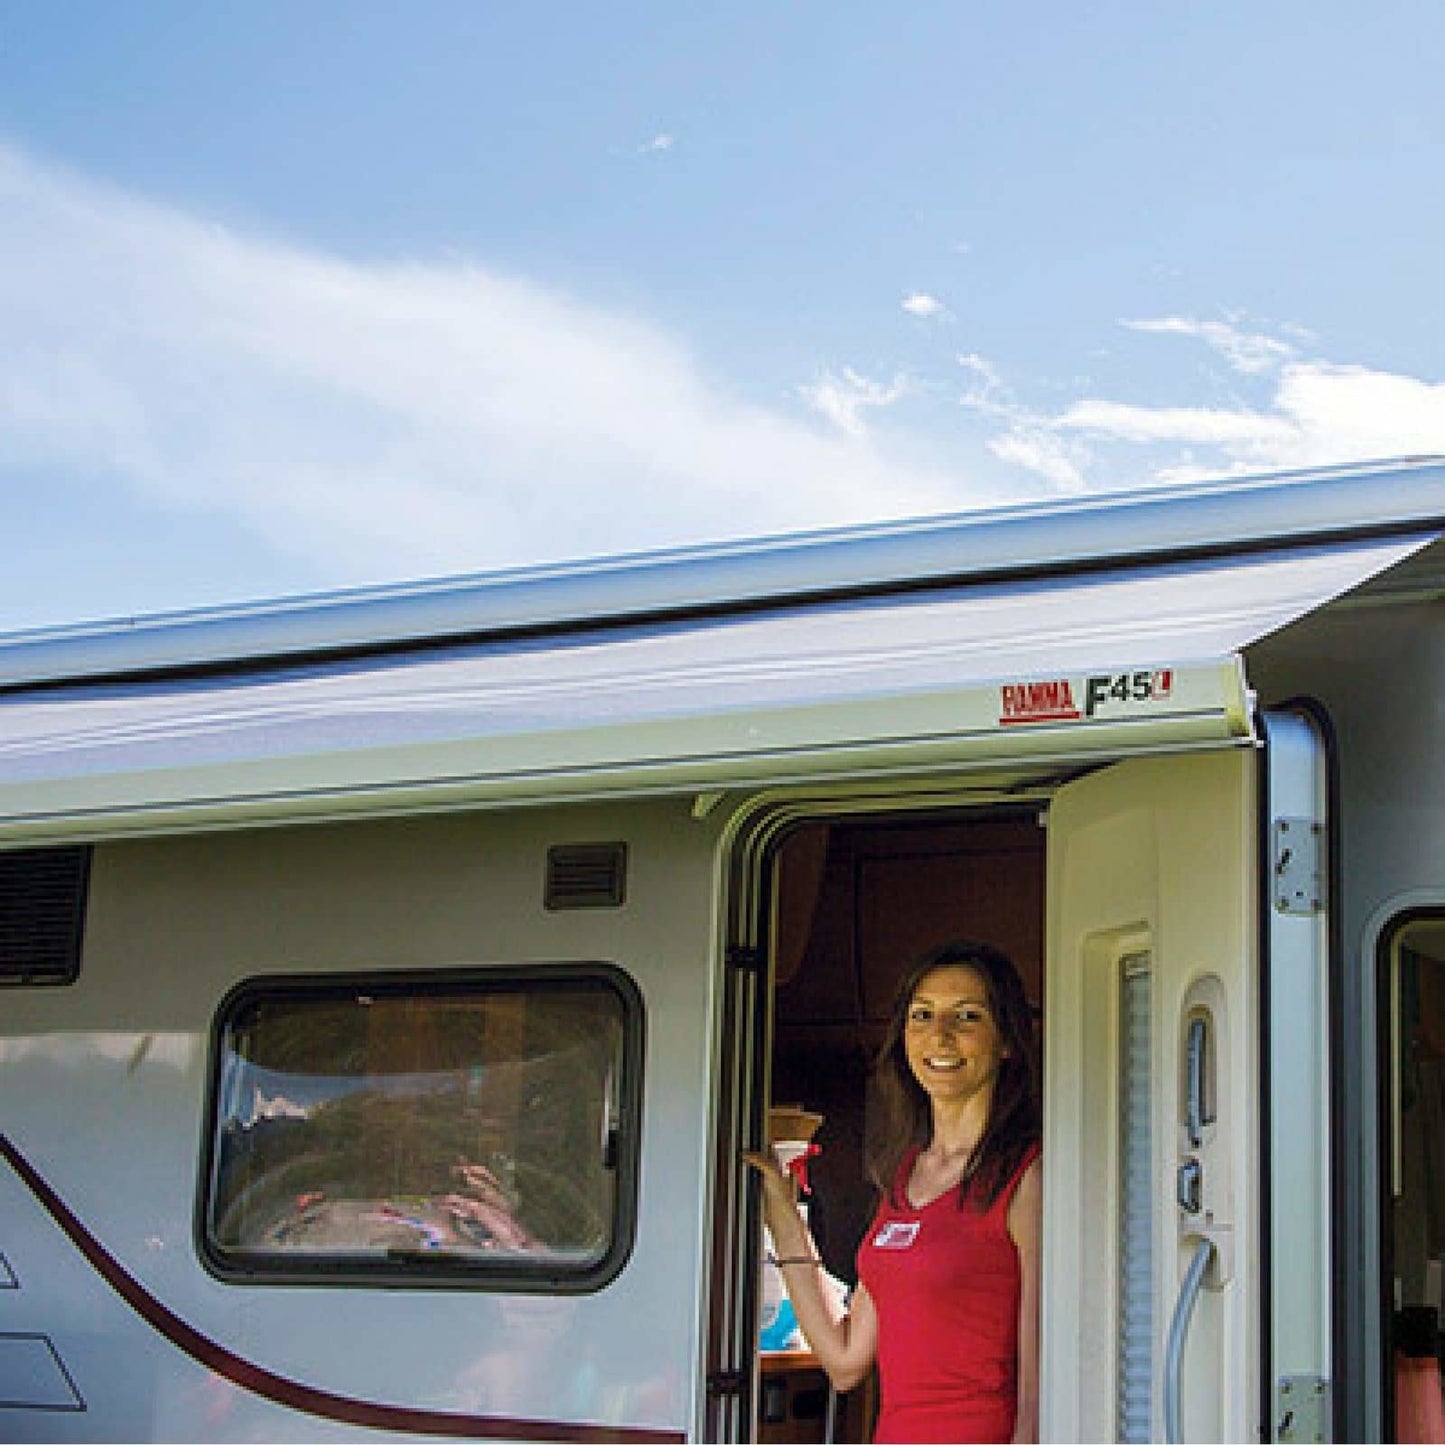 Fiamma 12V Polar White Awning Motorization Kit made by Fiamma. A Motorhome Awnings sold by Quality Caravan Awnings